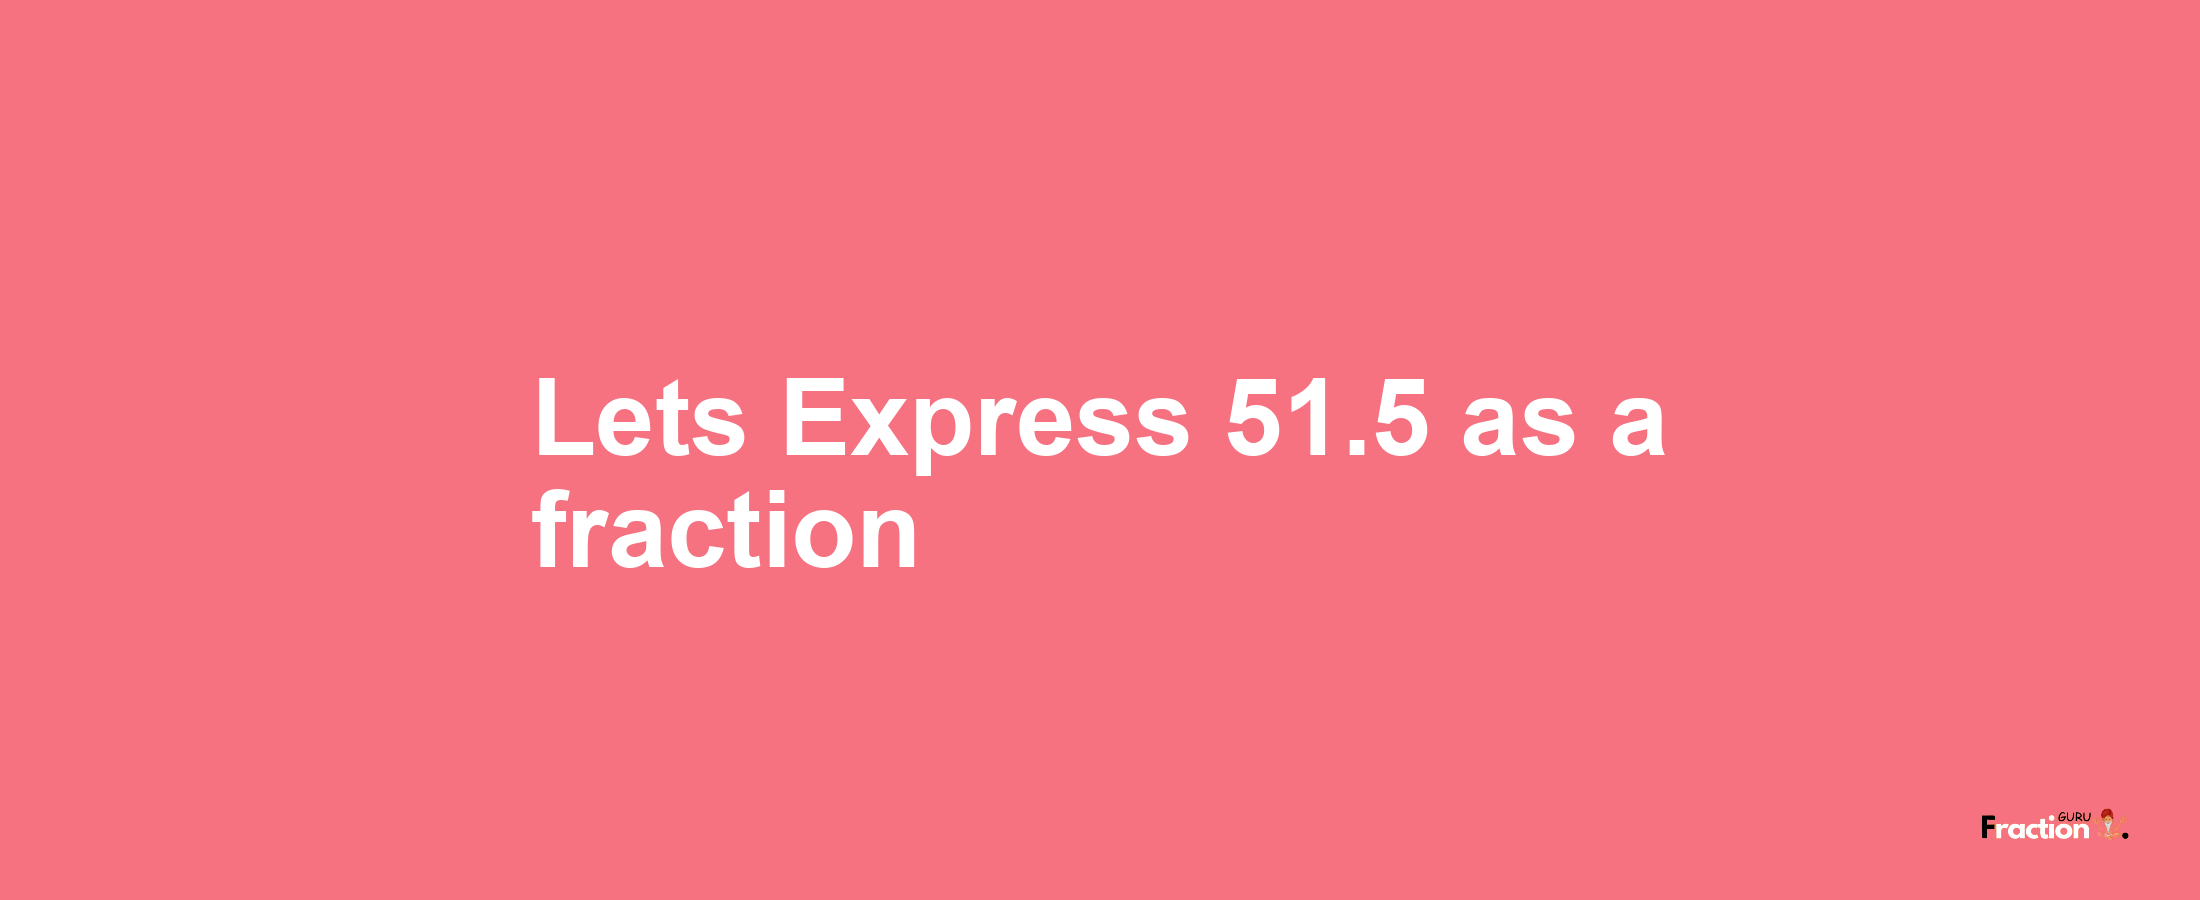 Lets Express 51.5 as afraction